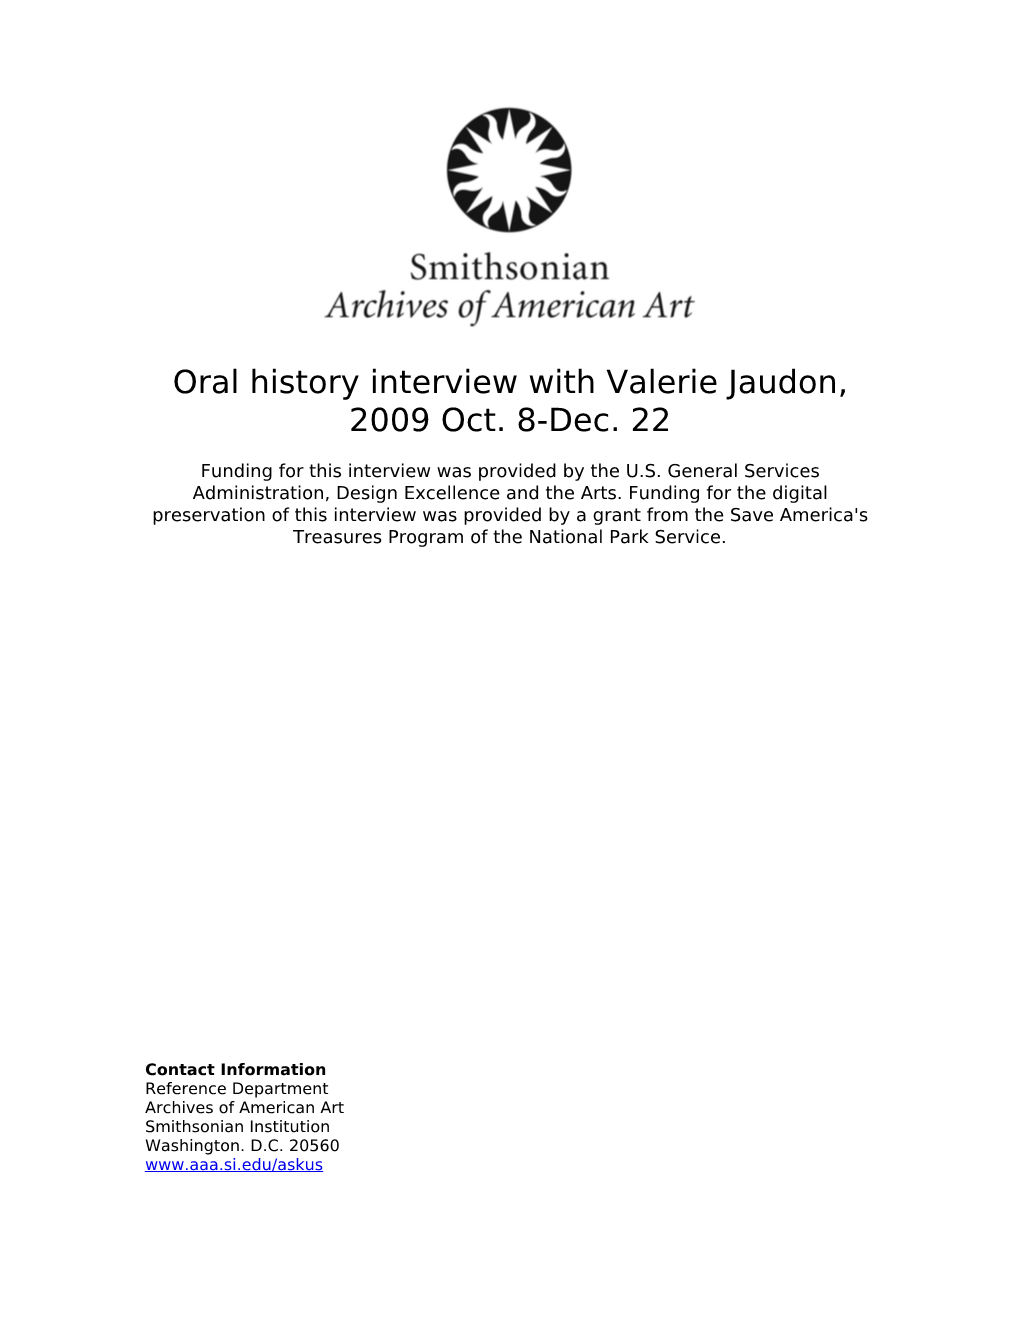 Oral History Interview with Valerie Jaudon, 2009 Oct. 8-Dec. 22